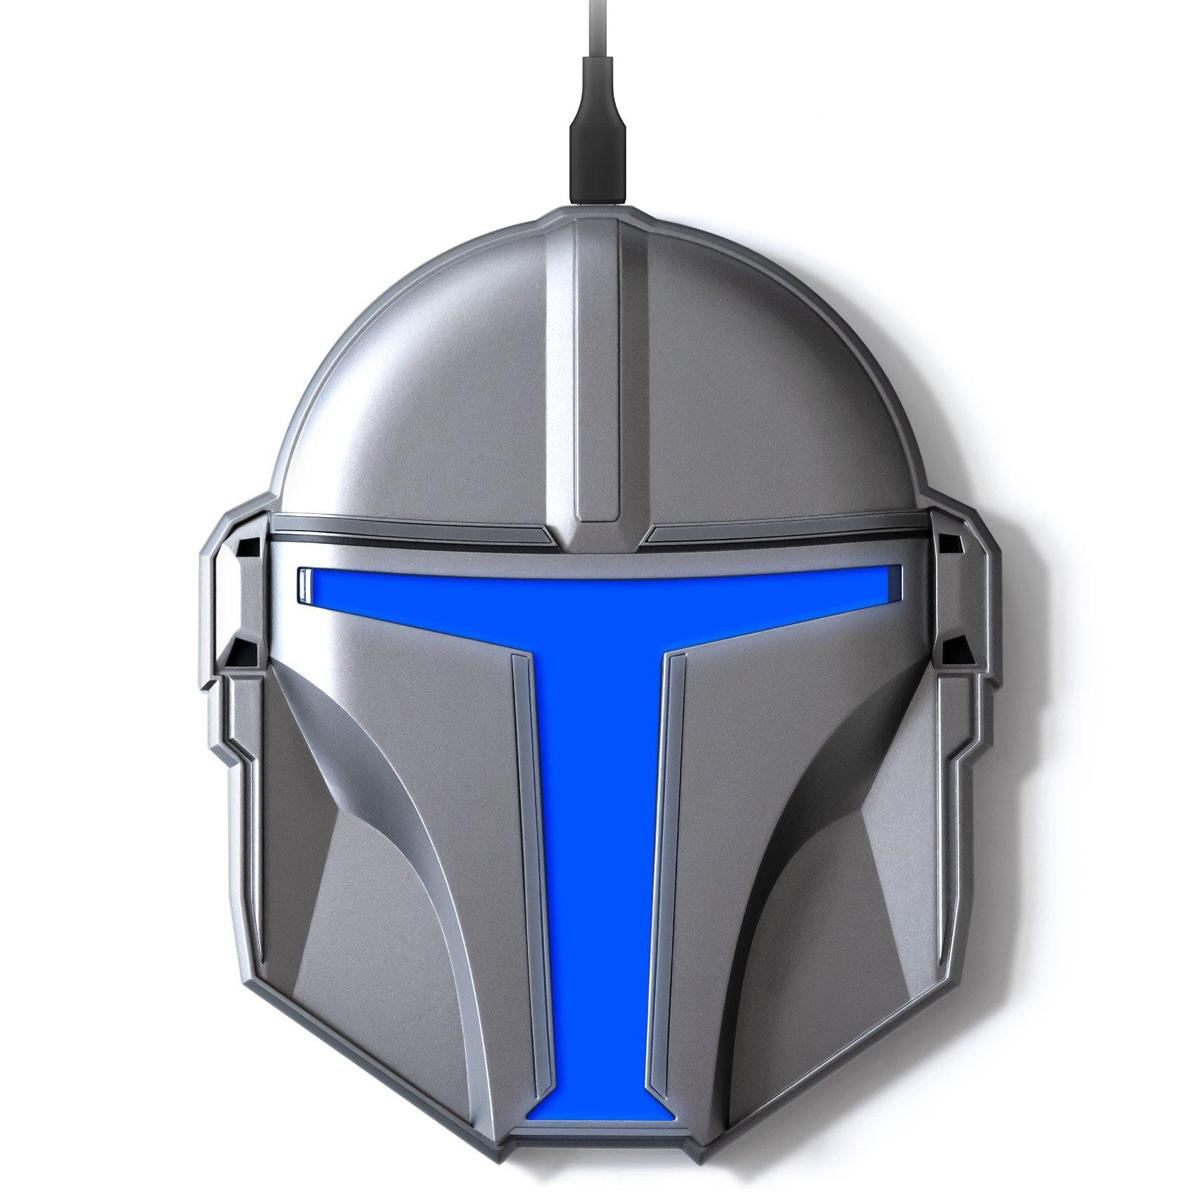 Star Wars The Mandalorian Light Up Wireless Charging Pad for $20.99